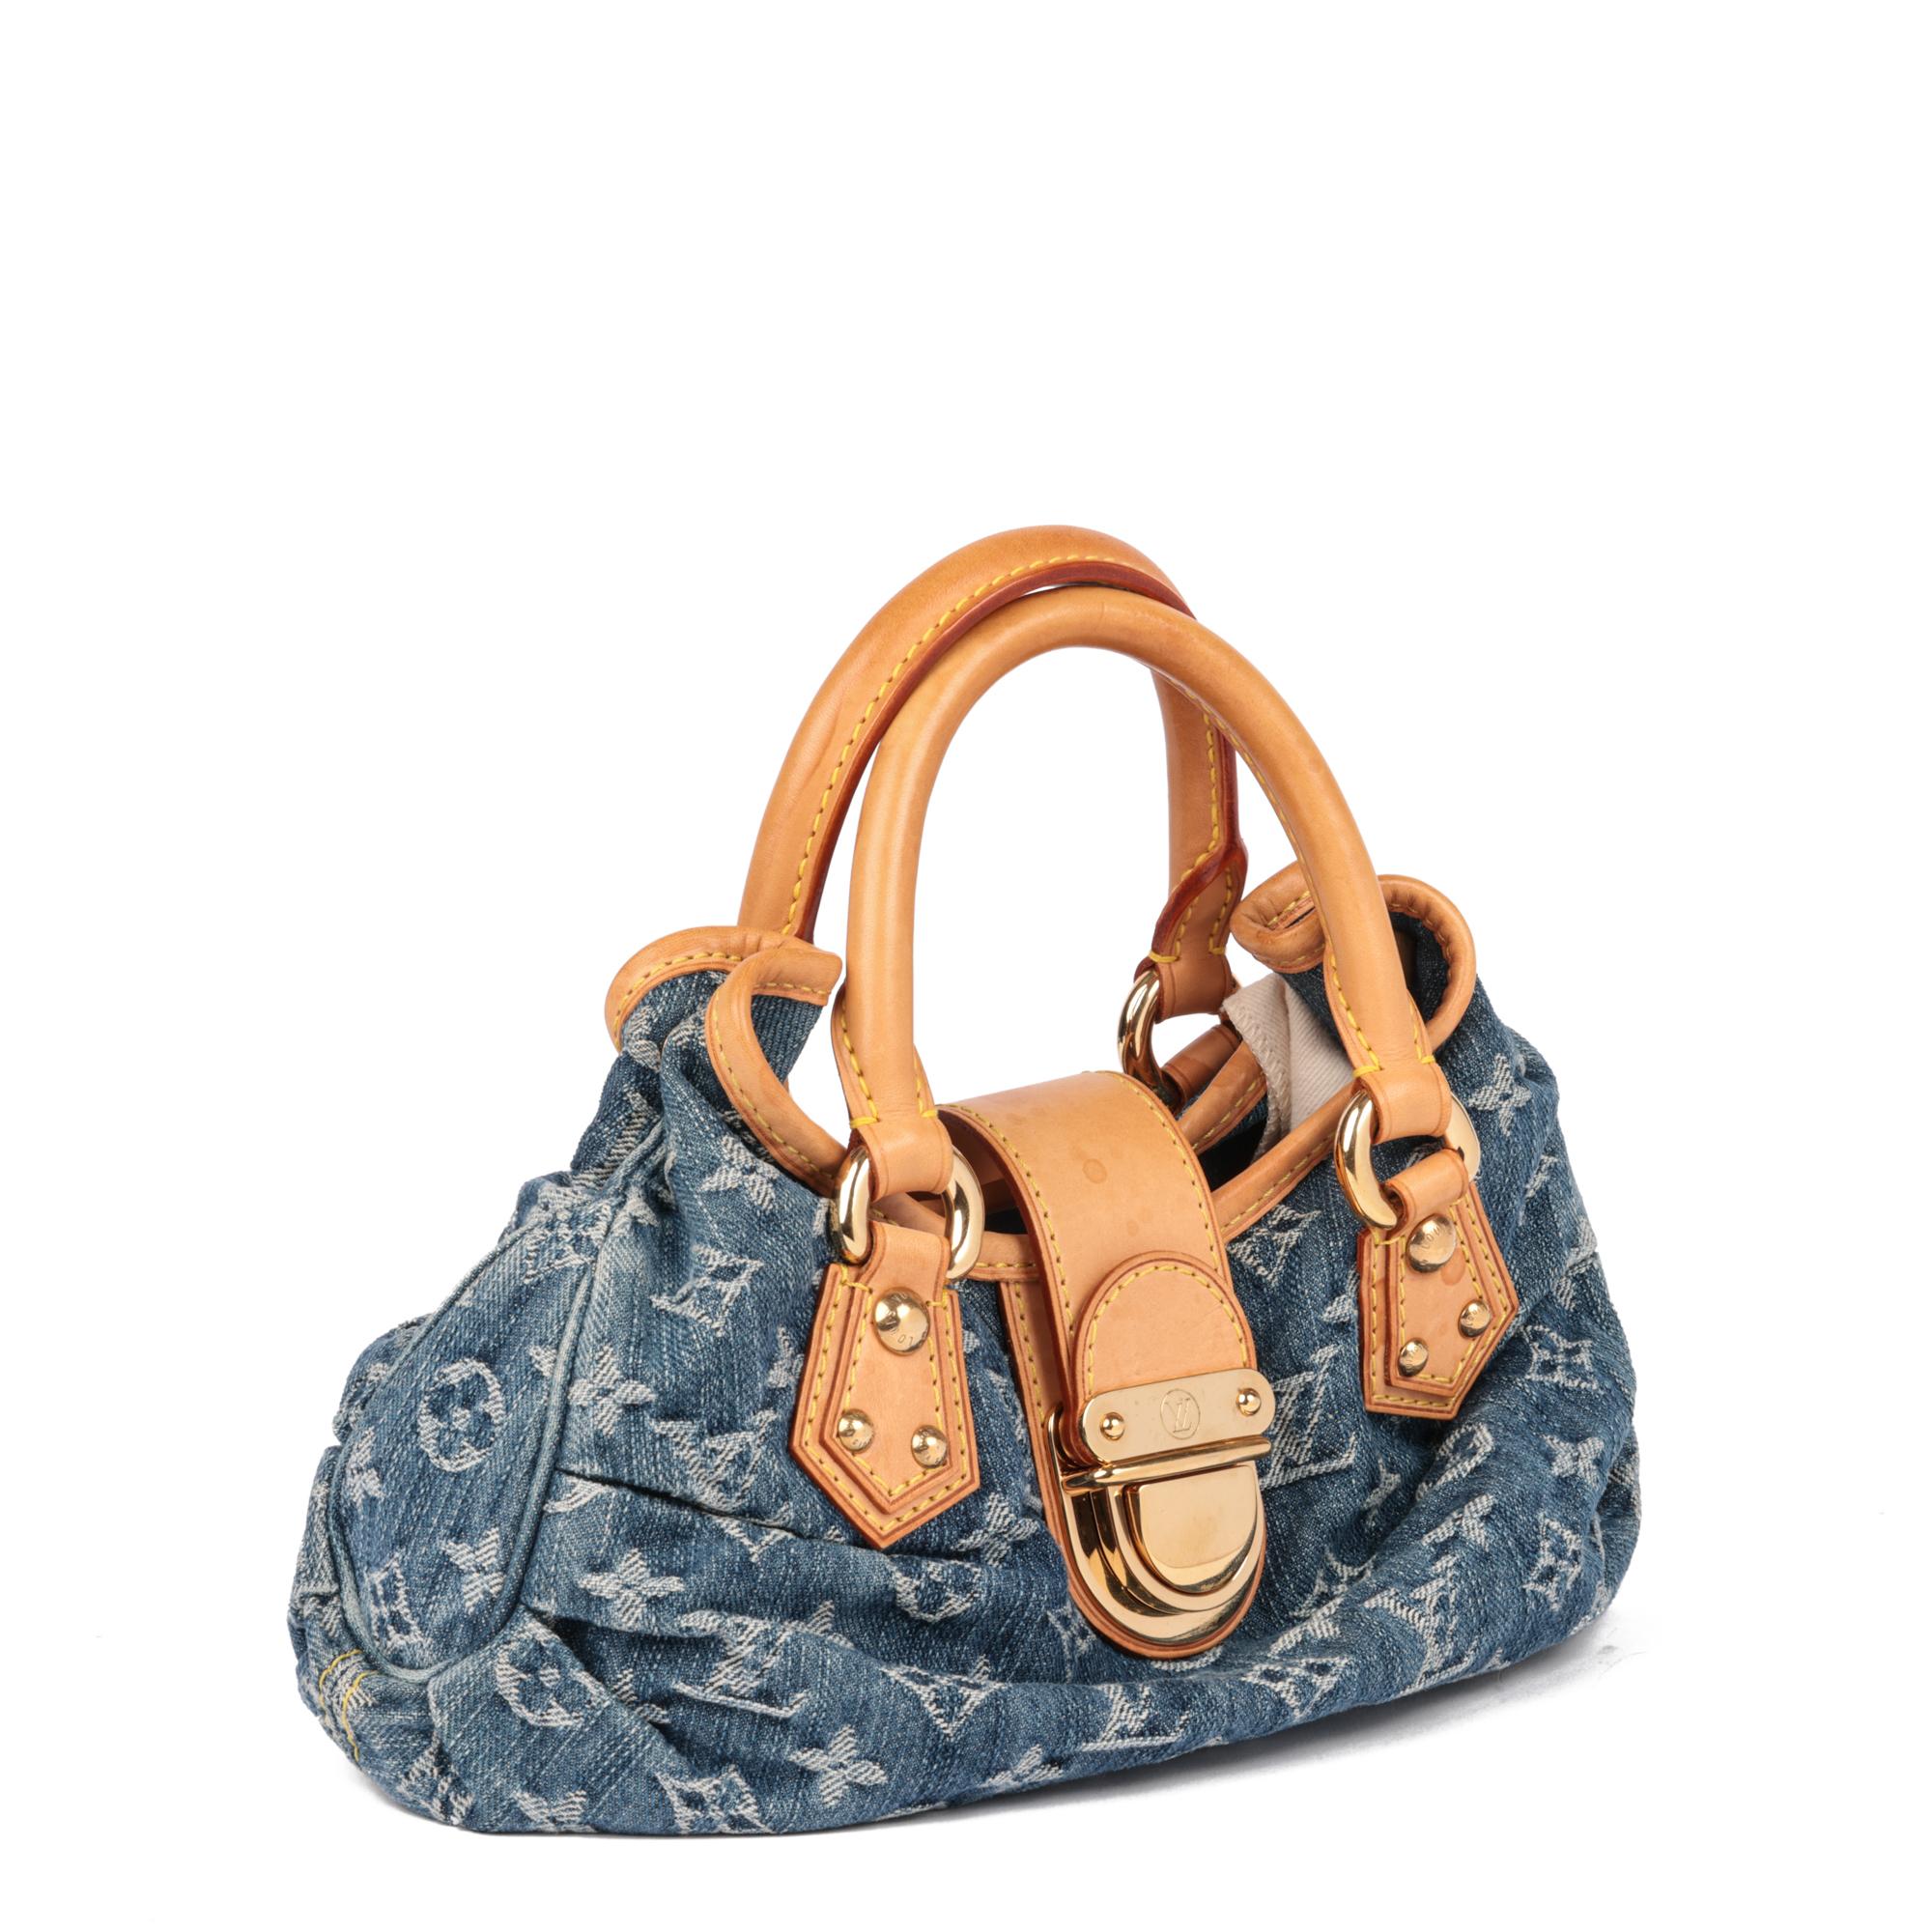 LOUIS VUITTON
Blue Monogram Denim & Vachetta Leather Pleaty

Xupes Reference: HB5109
Serial Number: VI1015
Age (Circa): 2005
Accompanied By: Louis Vuitton Dust Bag
Authenticity Details: Date Stamp (Made in France)
Gender: Ladies
Type: Tote

Colour: